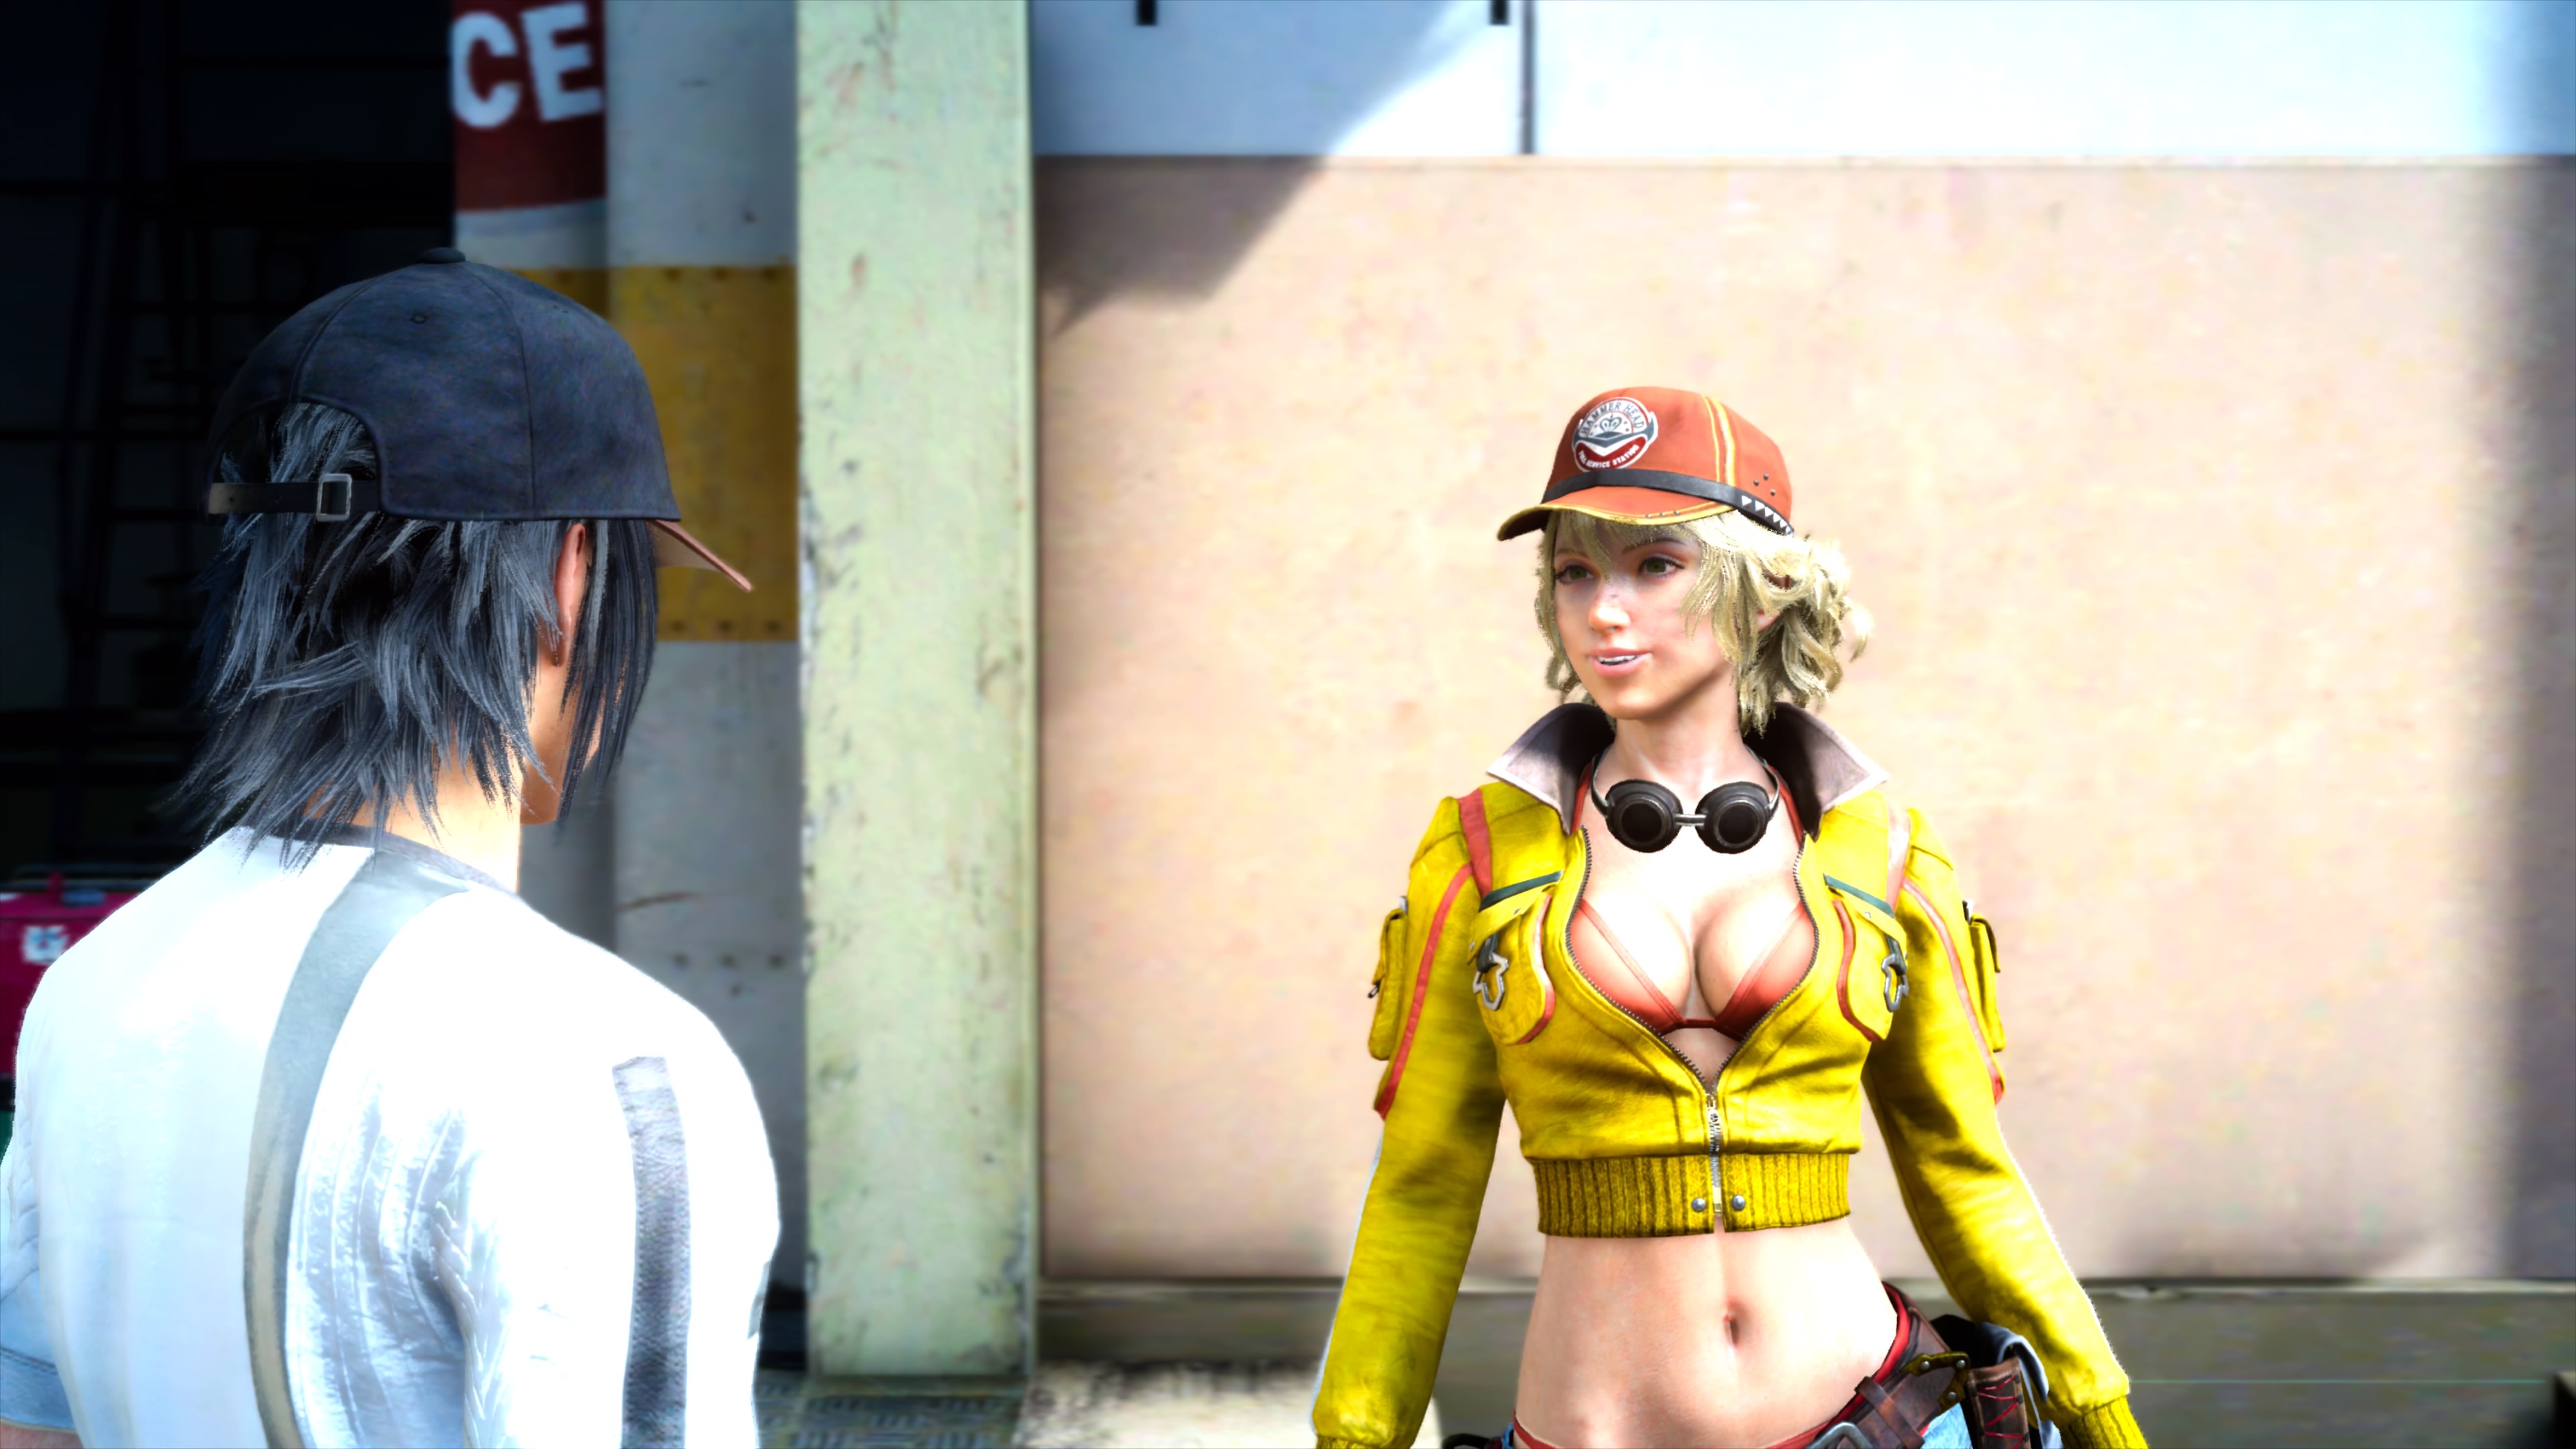 Let’s talk about boobs (in games)